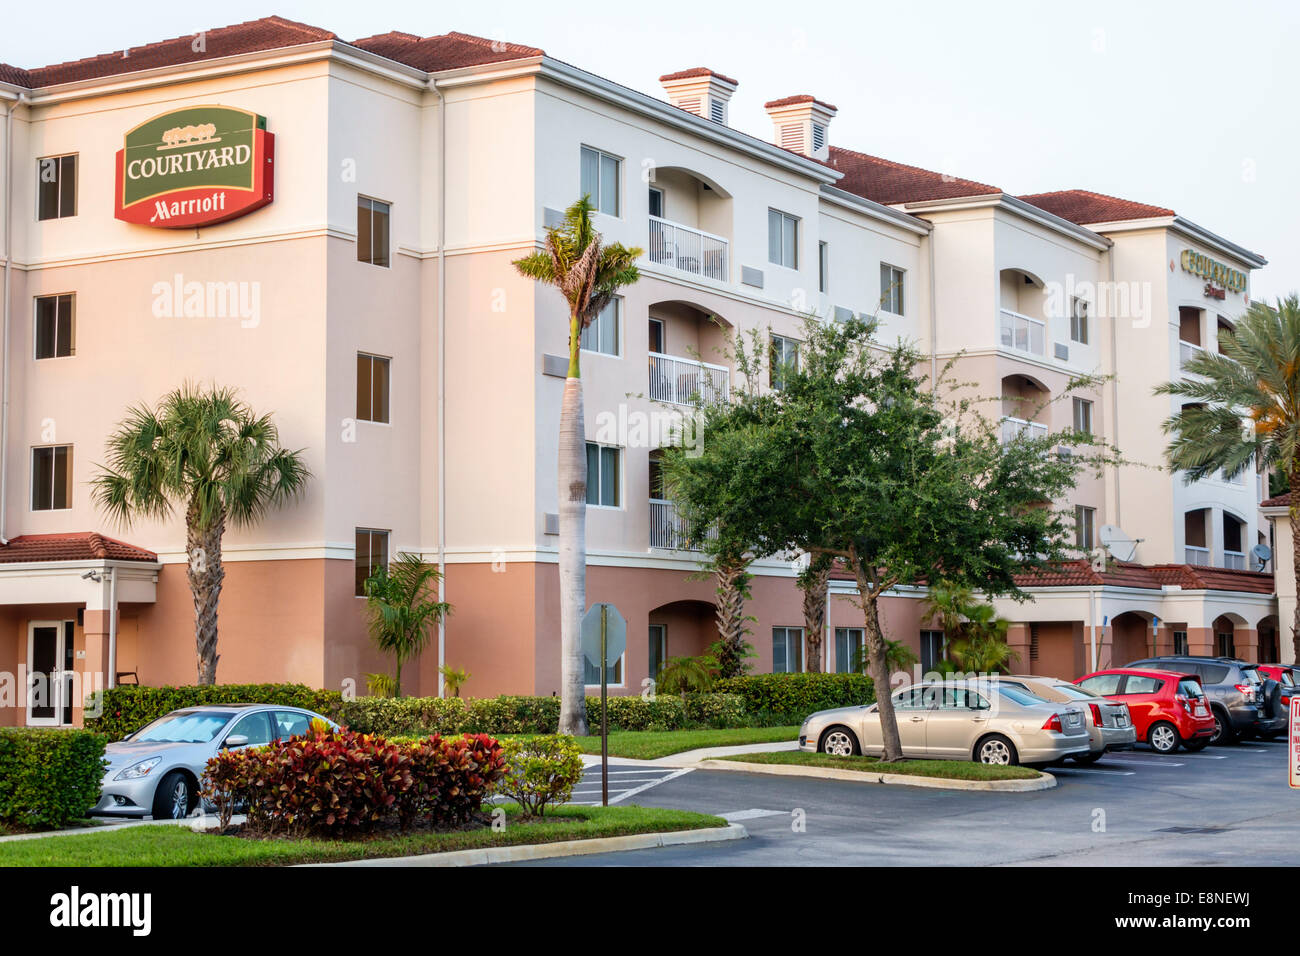 West Palm Beach Florida,Courtyard by Marriott,motel,hotel,exterior,outside exterior,building,FL140523038 Stock Photo